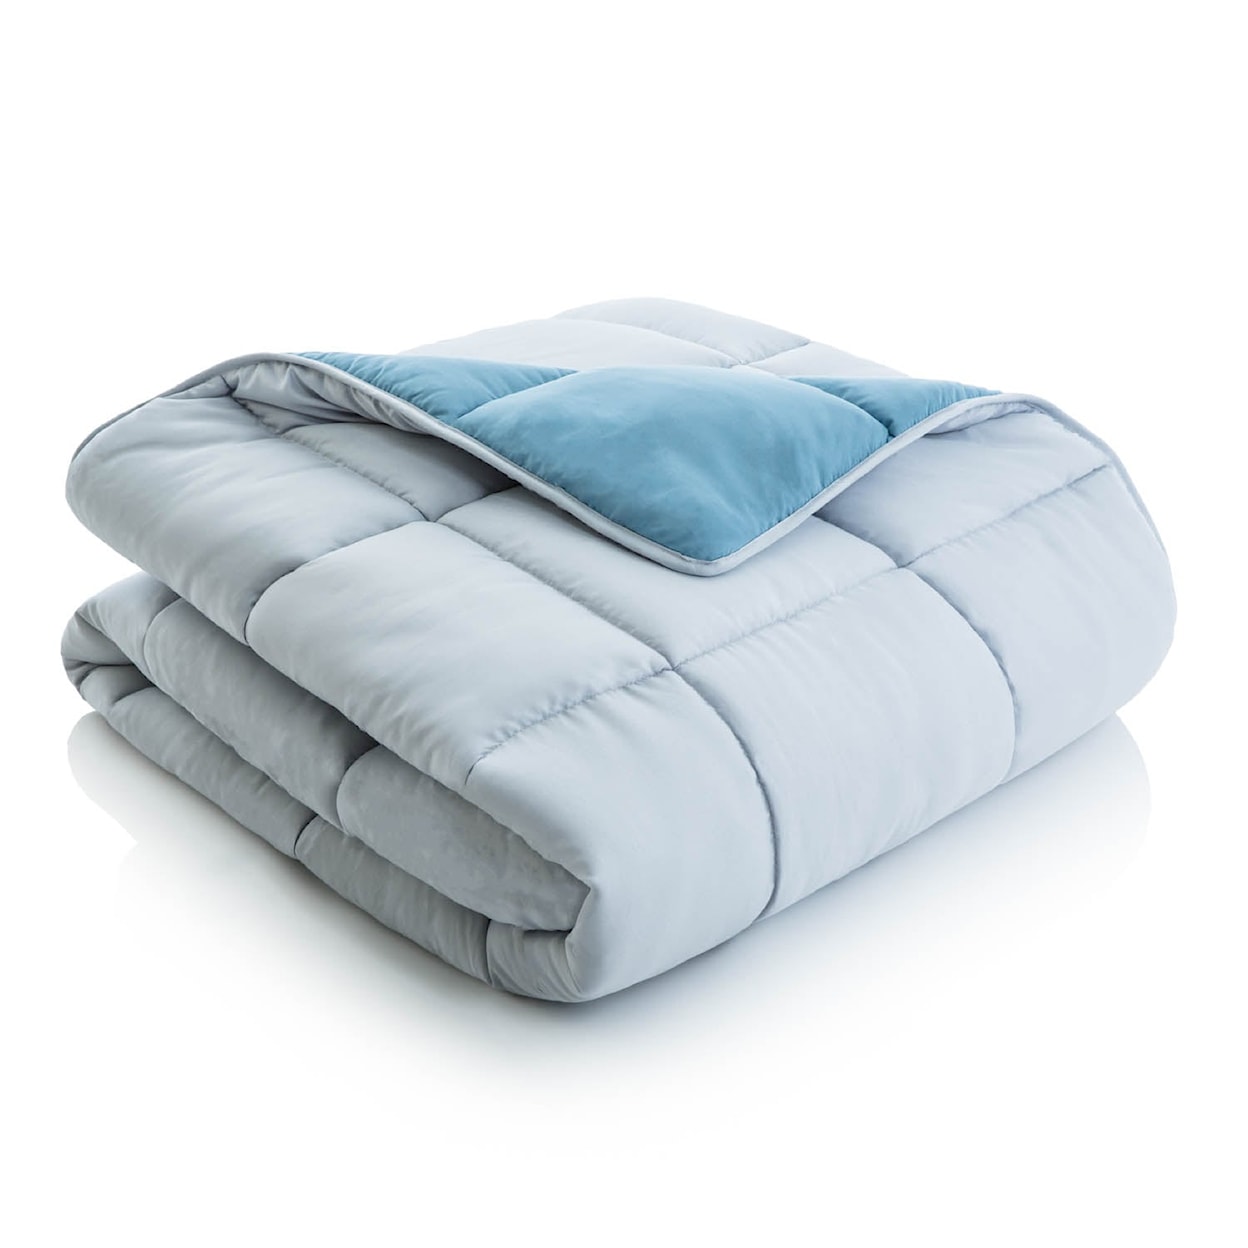 Malouf Reversible Bed in a Bag K White Reversible Bed in a Bag